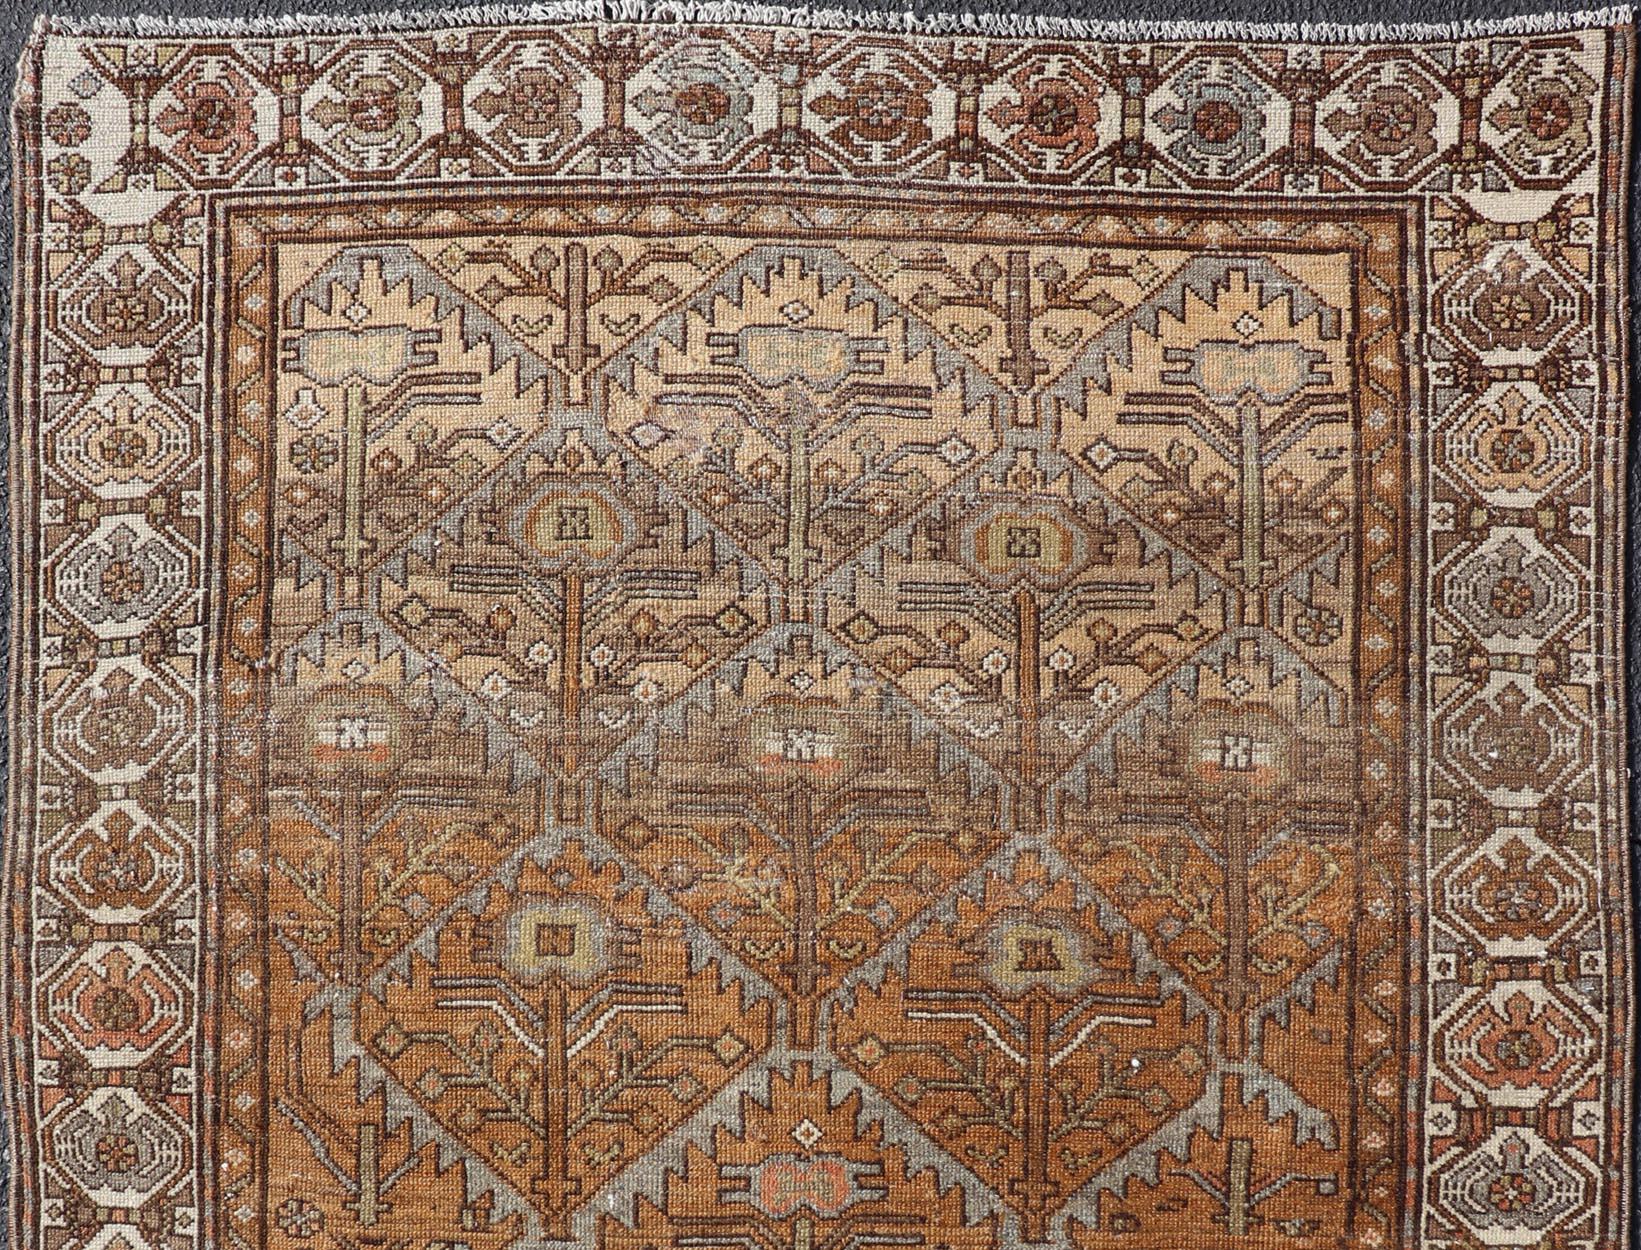 Antique Persian Malayer in Rustic Earthy Tones With All-Over Tribal Medallions 4